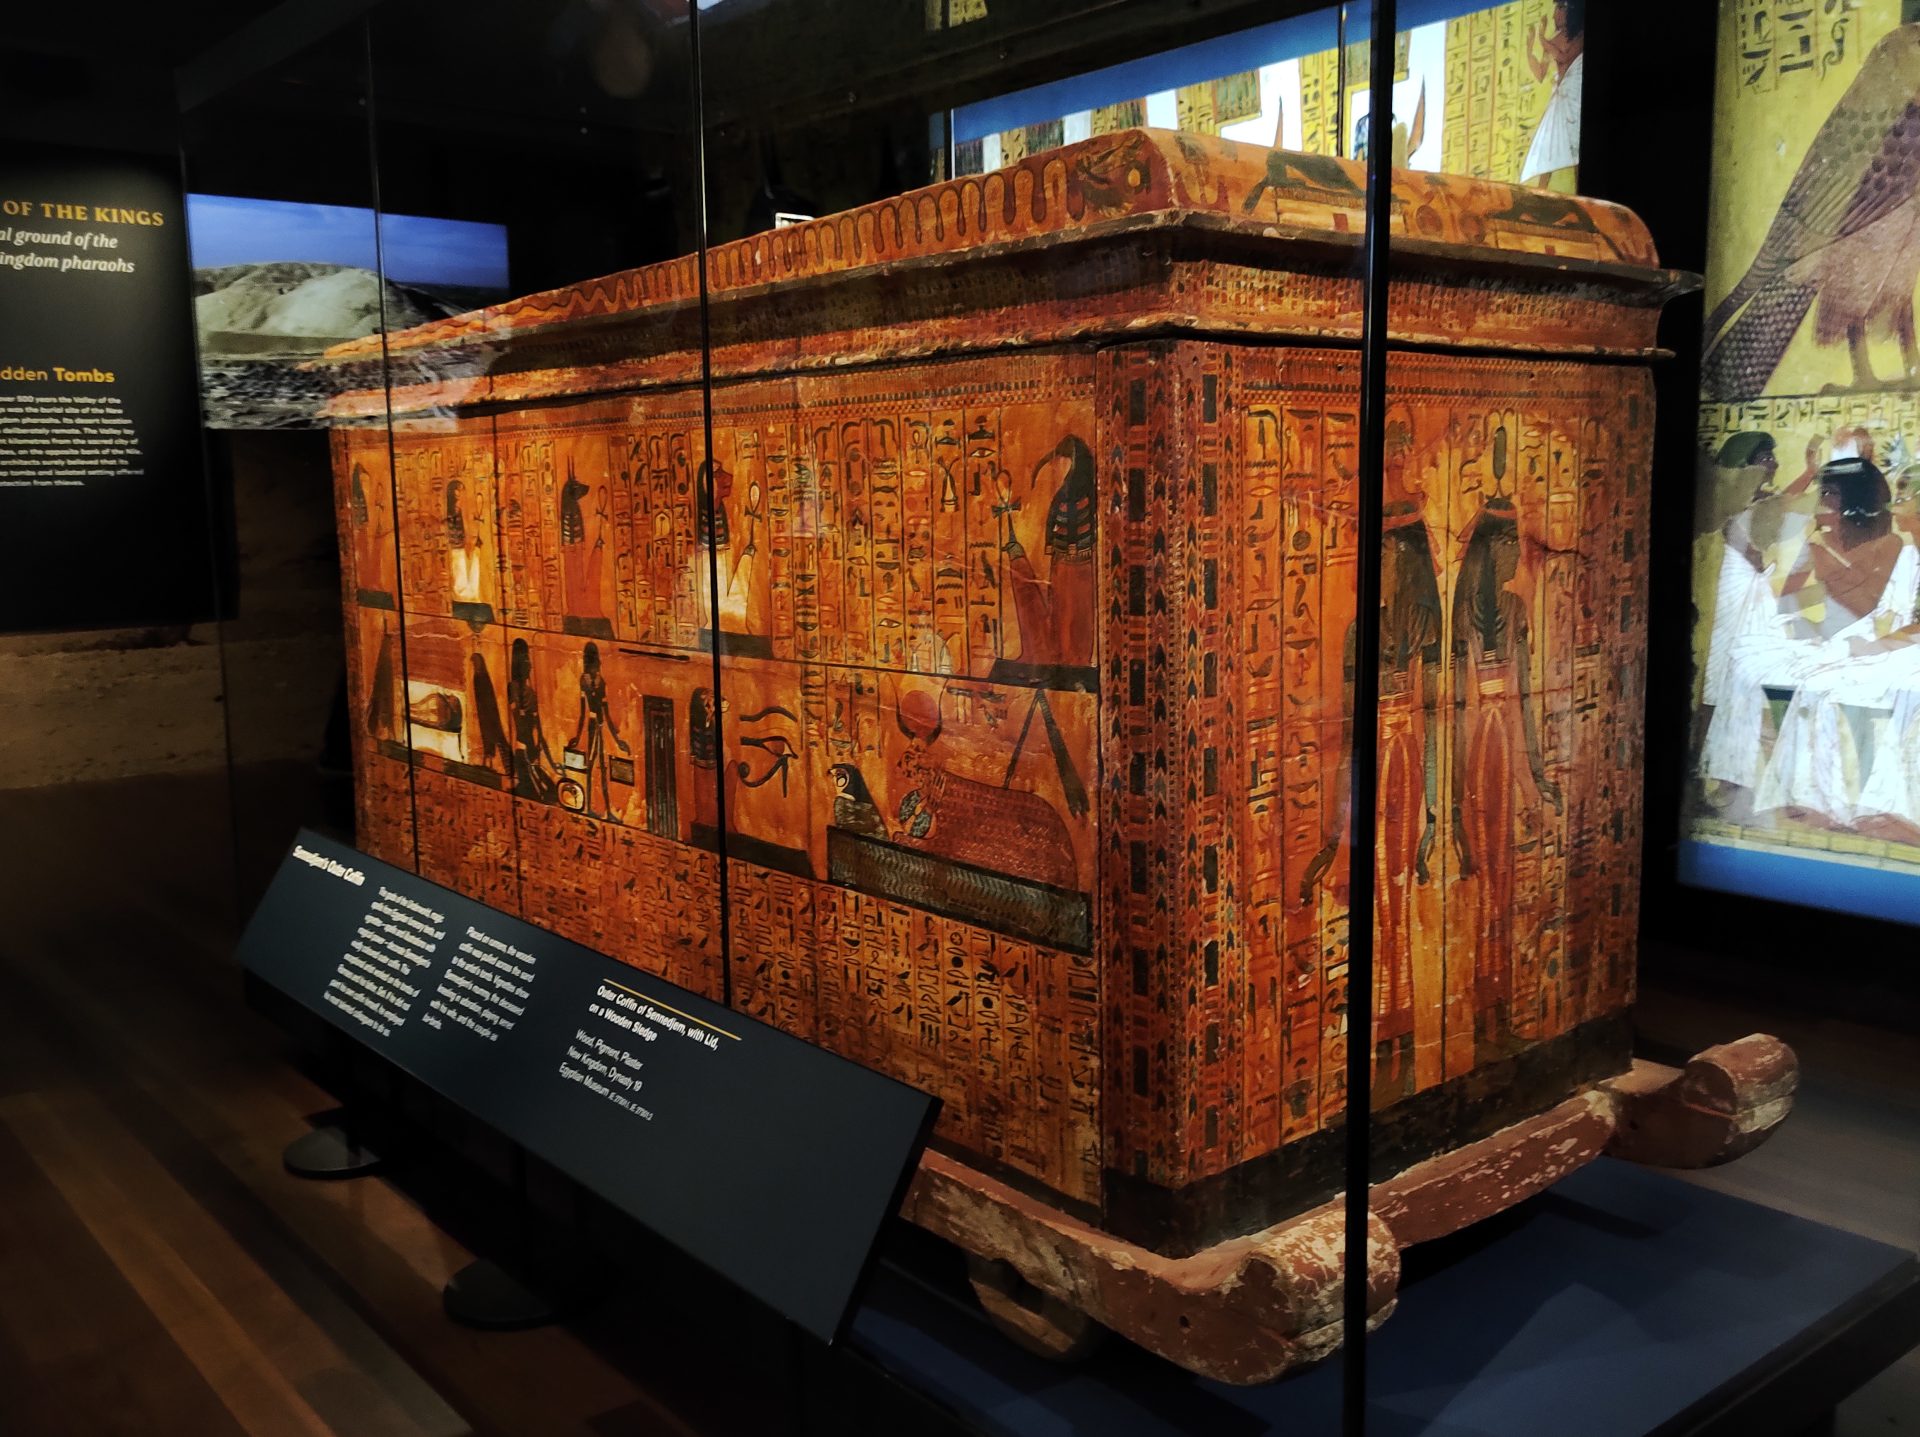 Sydney’s Ramses II & the Gold of the Pharaohs Exhibition